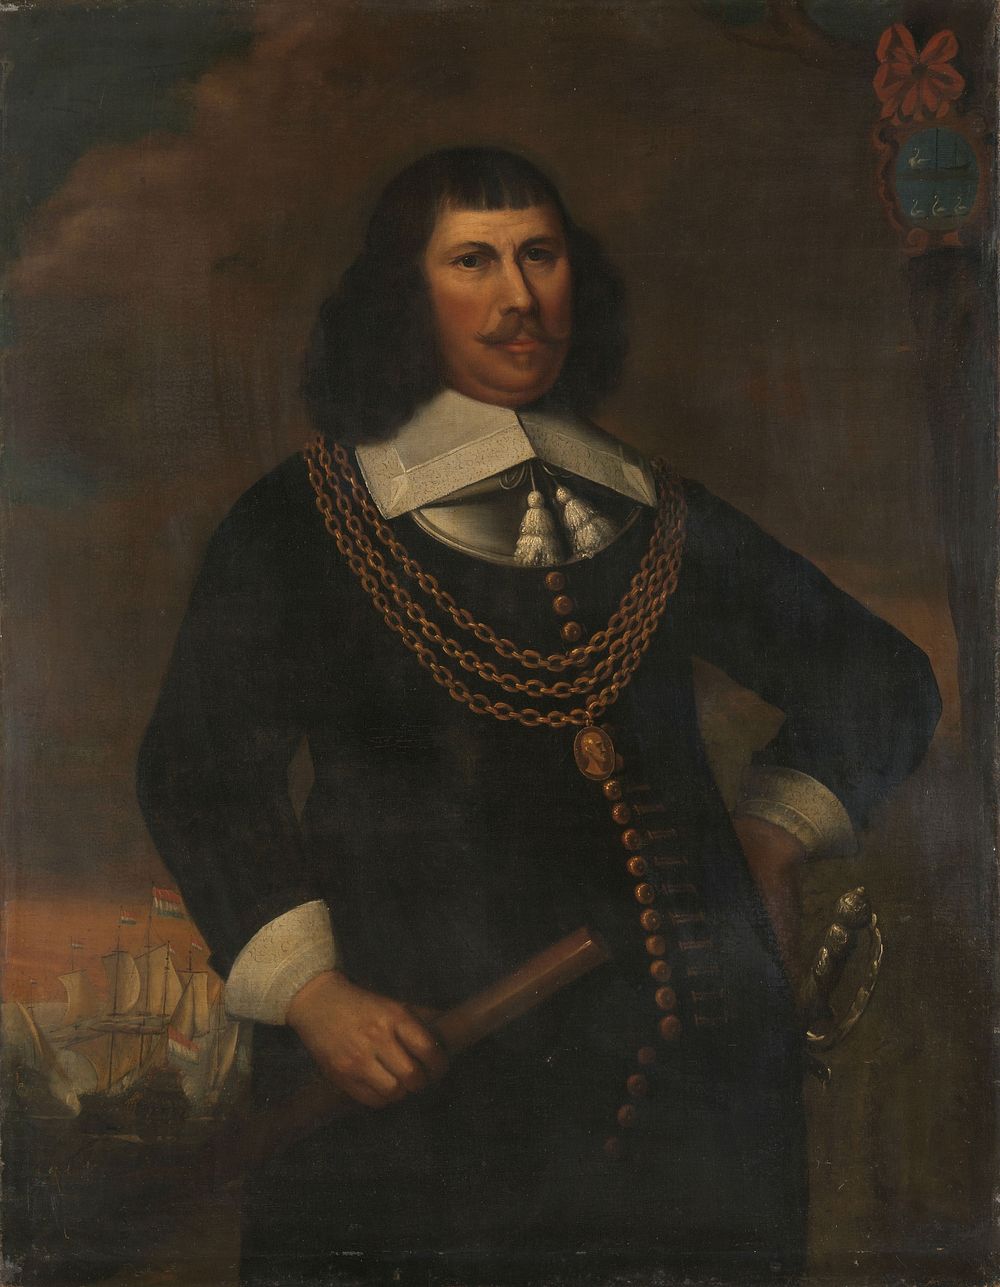 Pieter Florisz (ca. 1605-58), Vice-Admiral of the Northern District (1650 - 1720) by Abraham Liedts